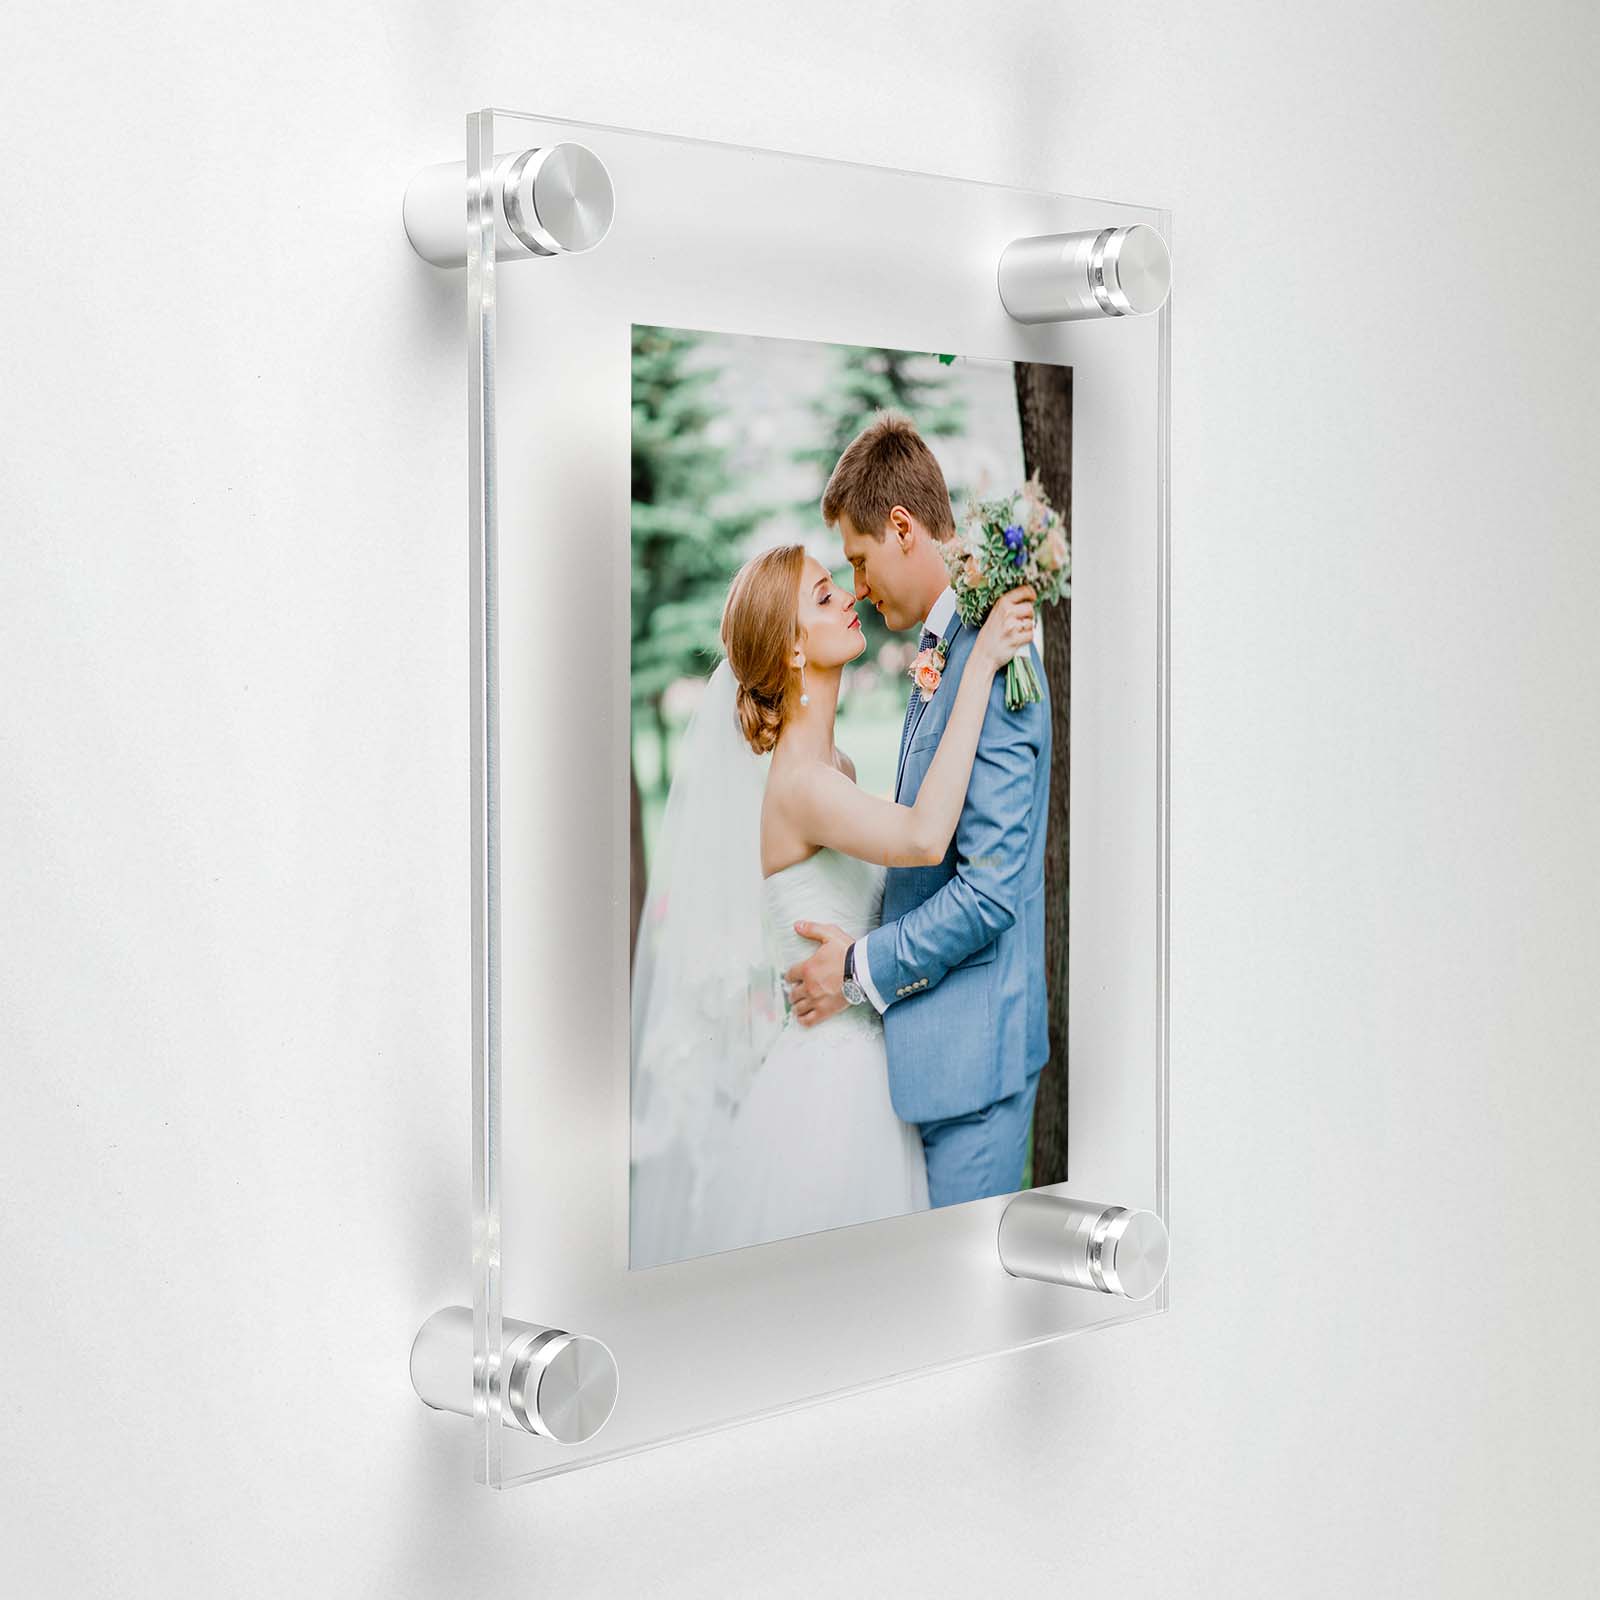 (2) 24'' x 36'' Clear Acrylics , Pre-Drilled With Polished Edges (Thick 3/16'' each), Wall Frame with (6) 5/8'' x 1'' Silver Anodized Aluminum Standoffs includes Screws and Anchors